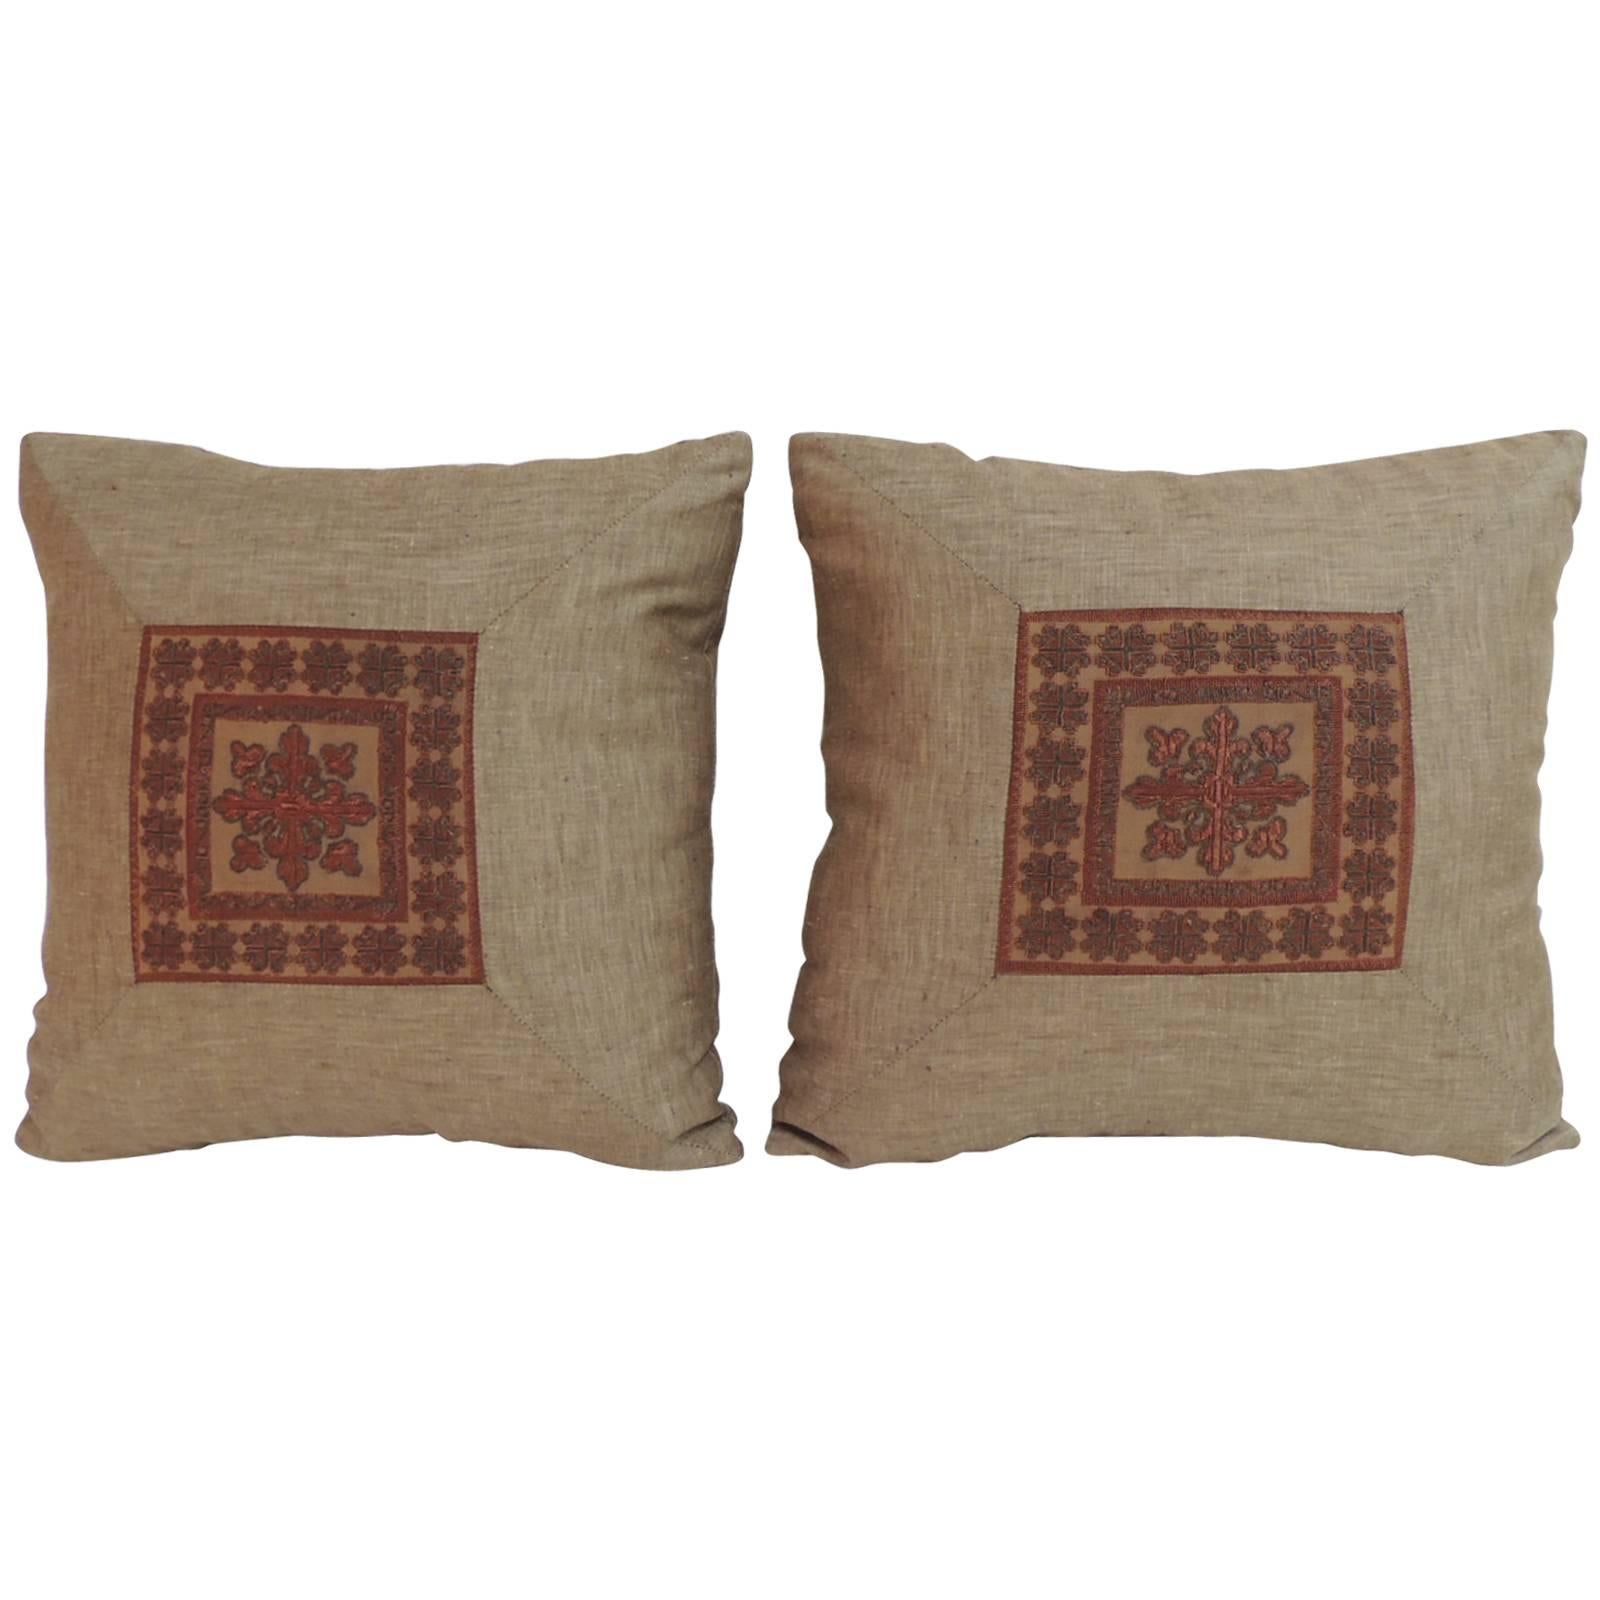 Pair of 19th Century Embroidered Persian Decorative Pillows